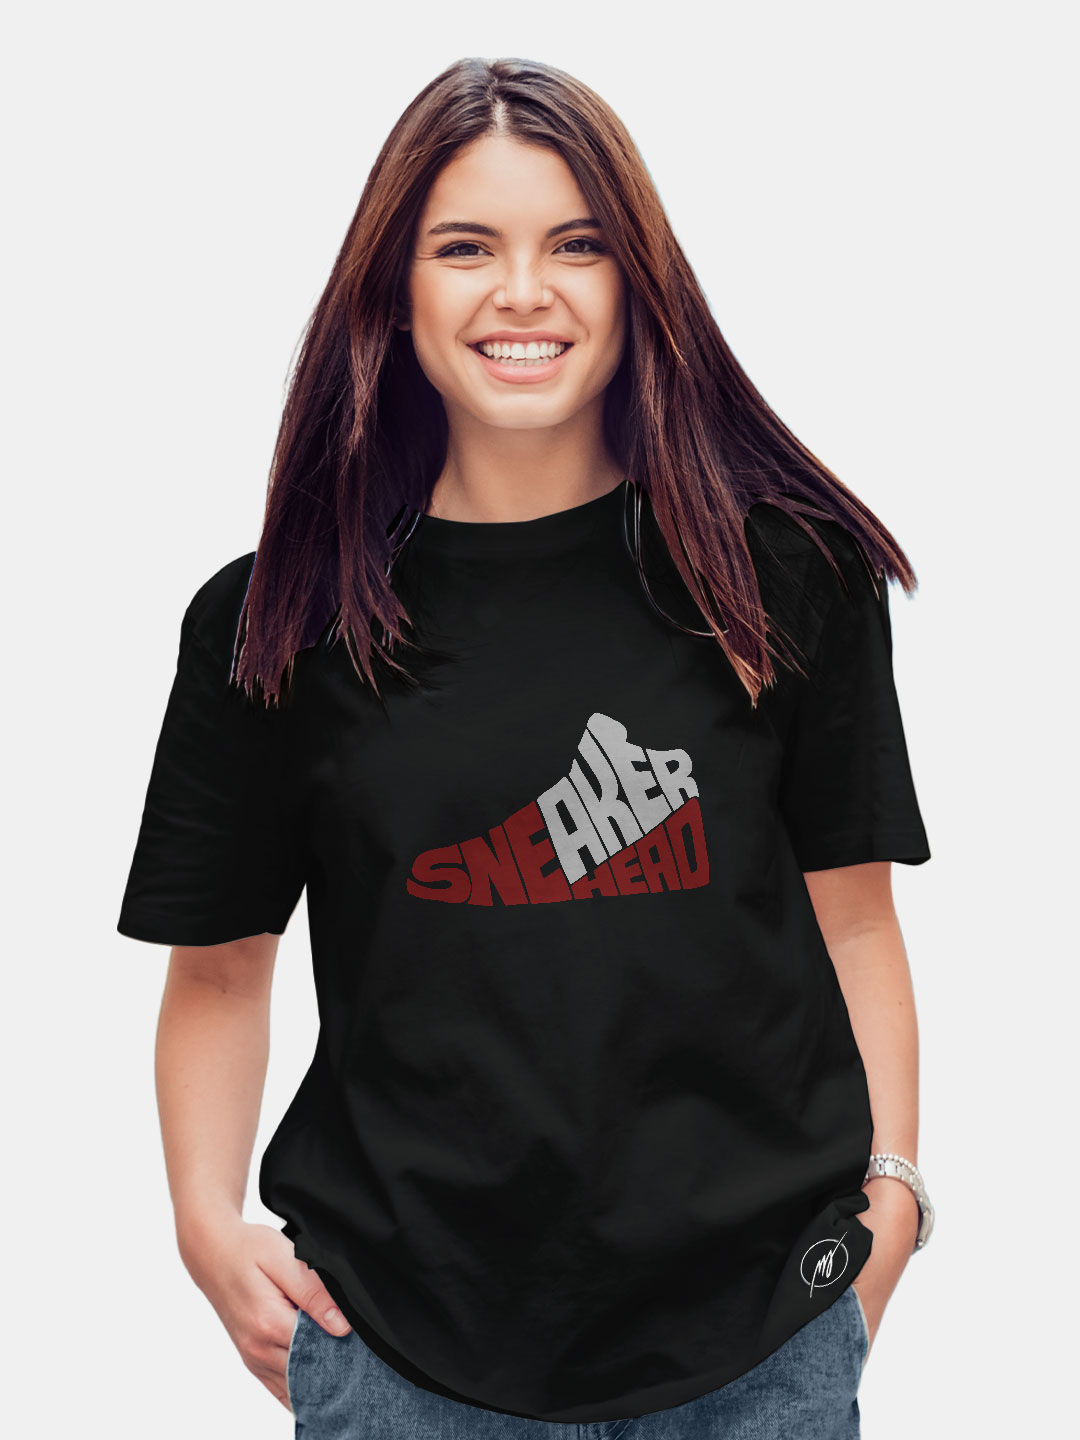 Sneakerhead Chicago - Womens Oversized T-Shirt Size : S Color - Black